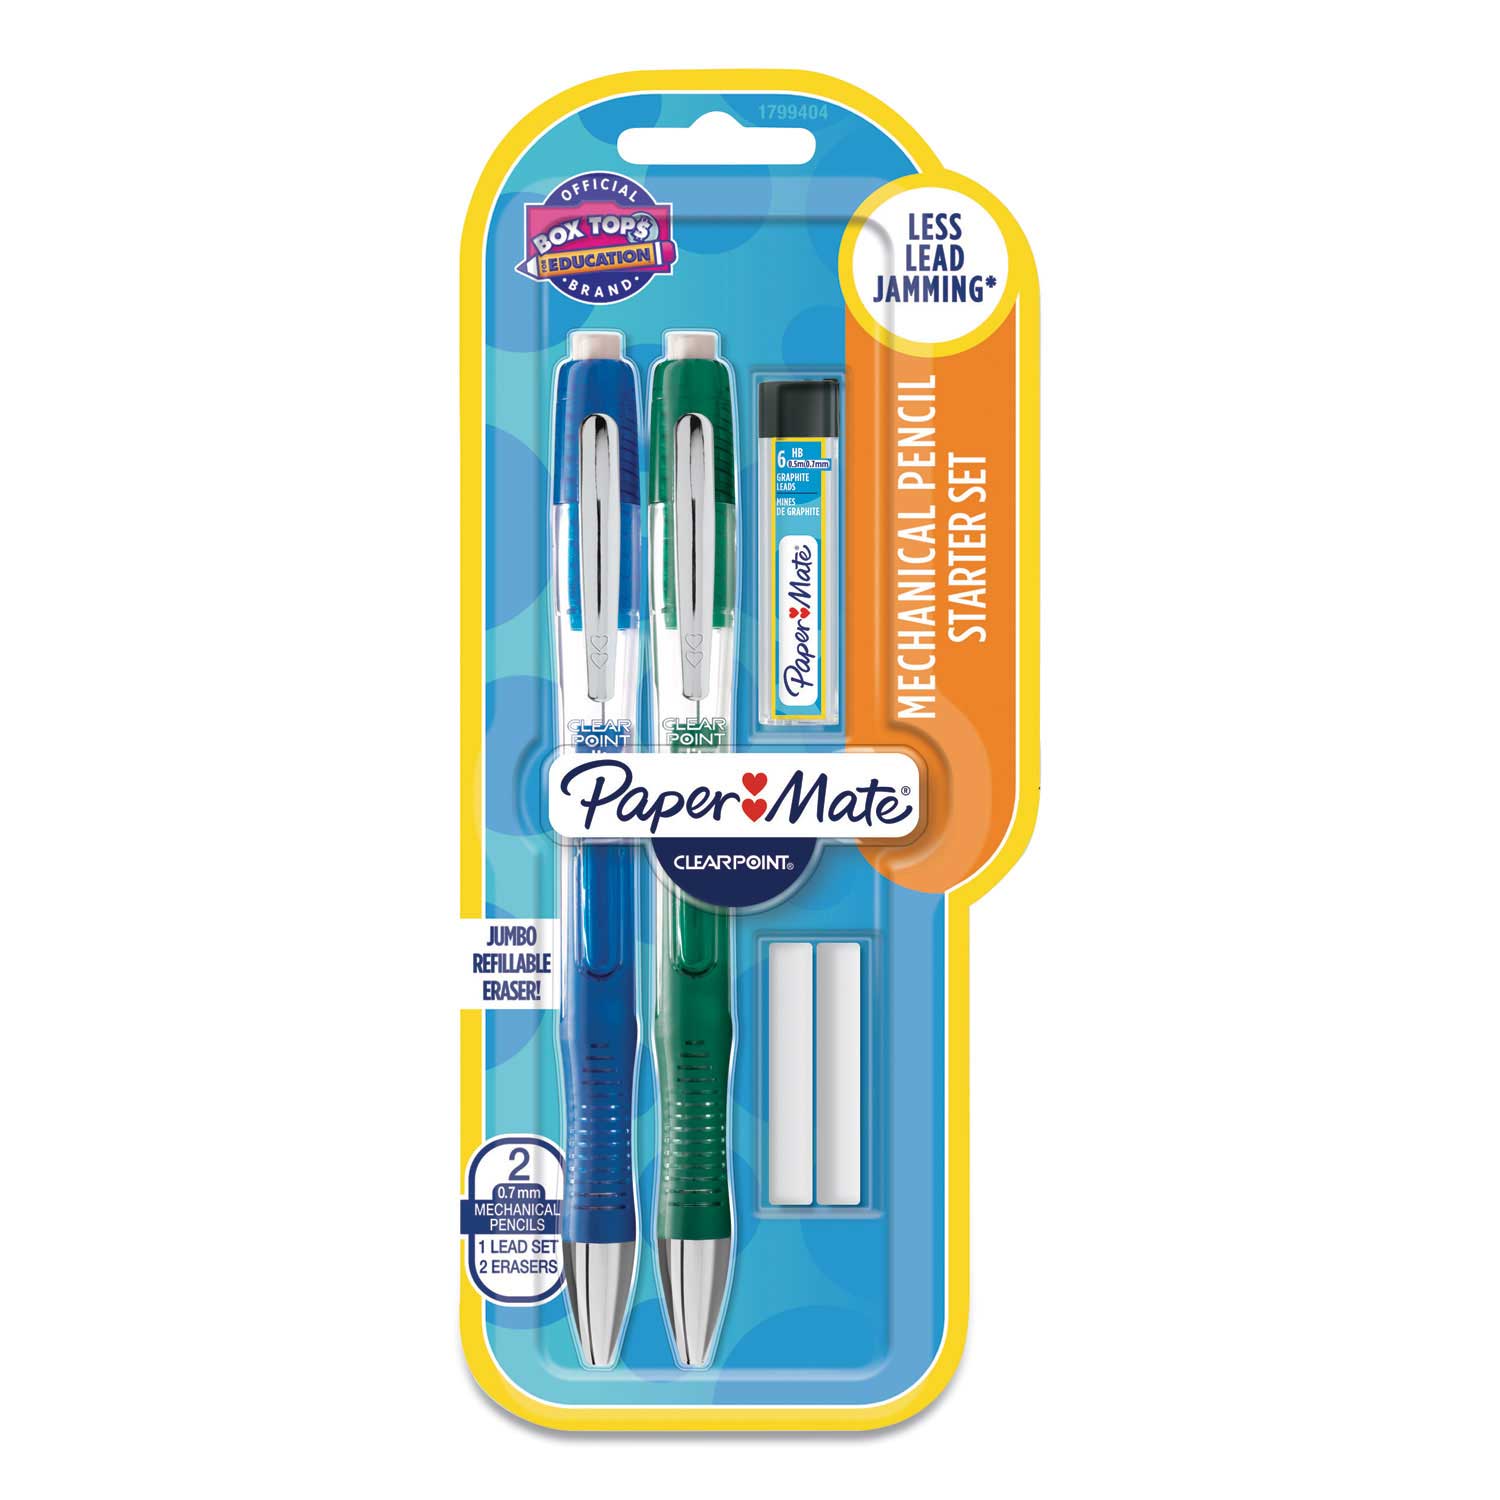 Paper Mate 0.7 mm Black Lead Blue and Green Barrel Clearpoint